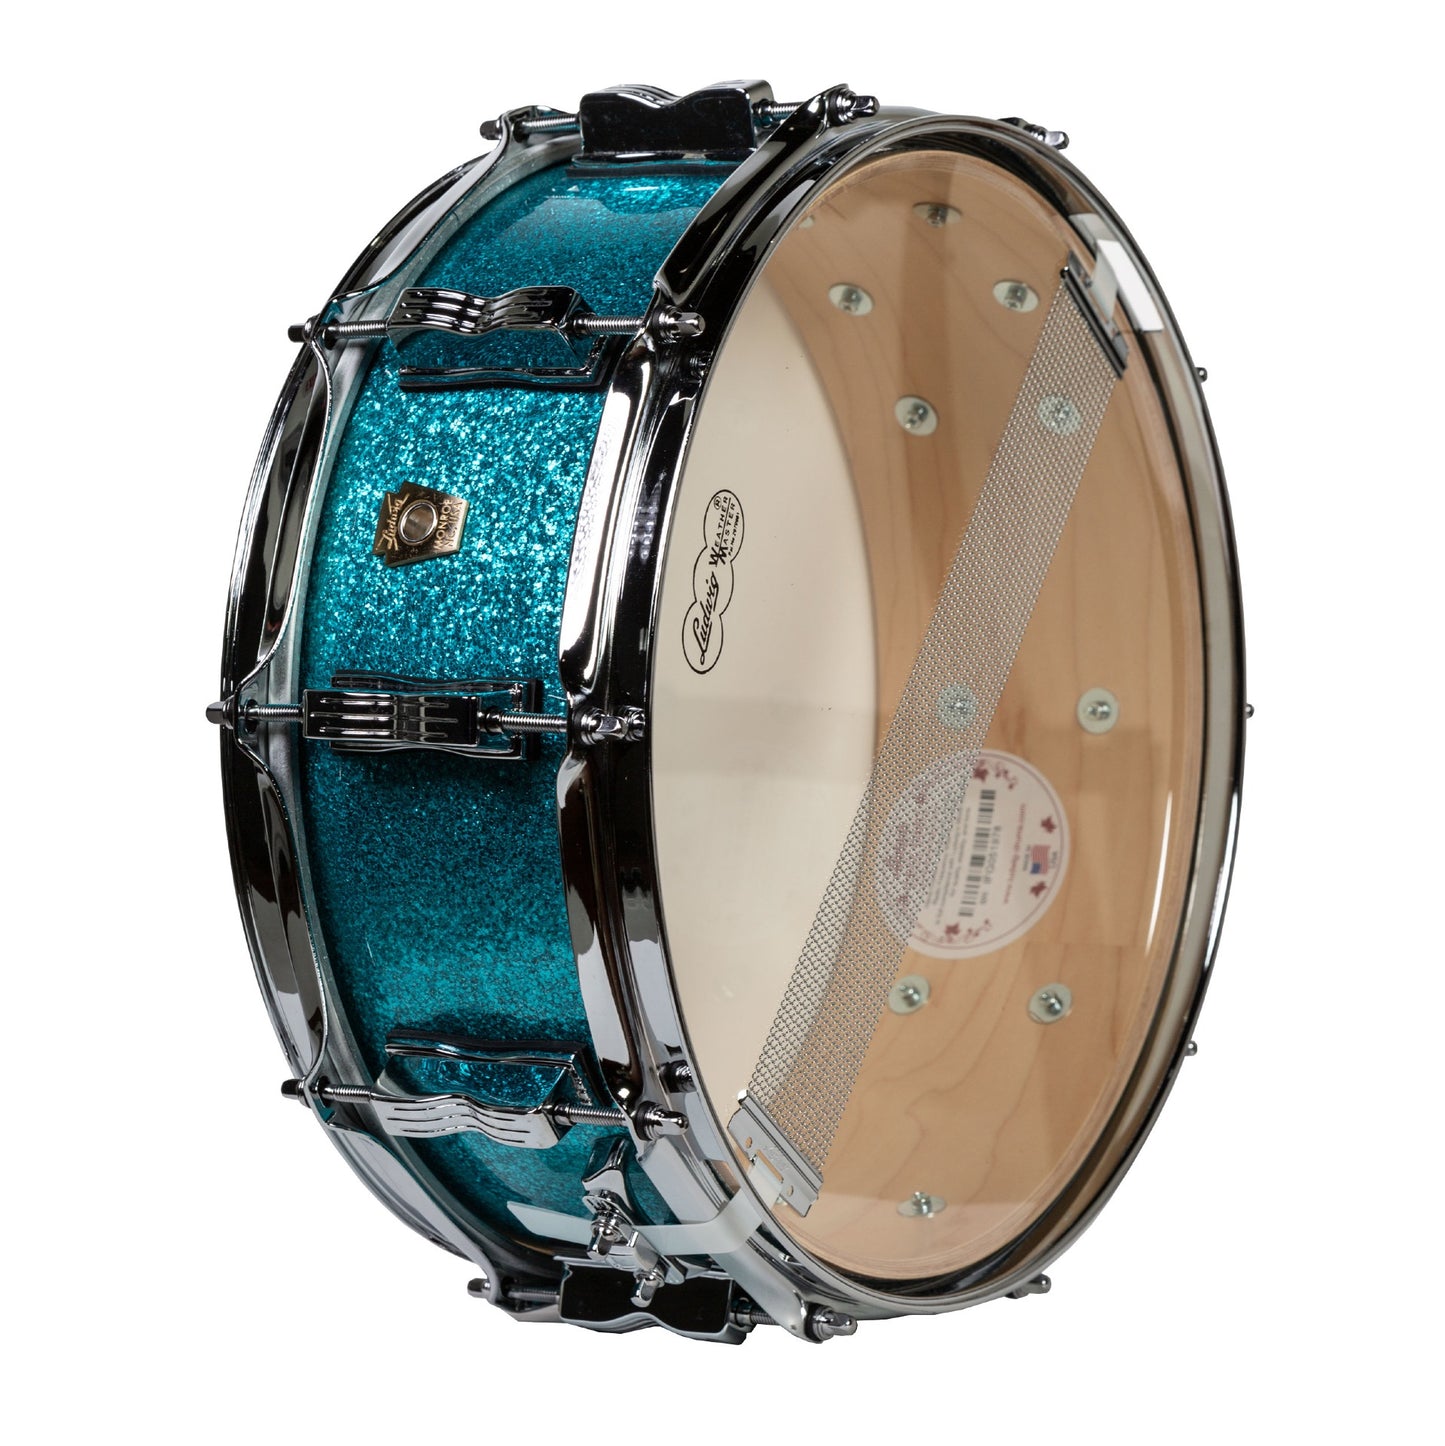 Ludwig Classic Maple 5x14 Snare Drum - Teal Blue Sparkle